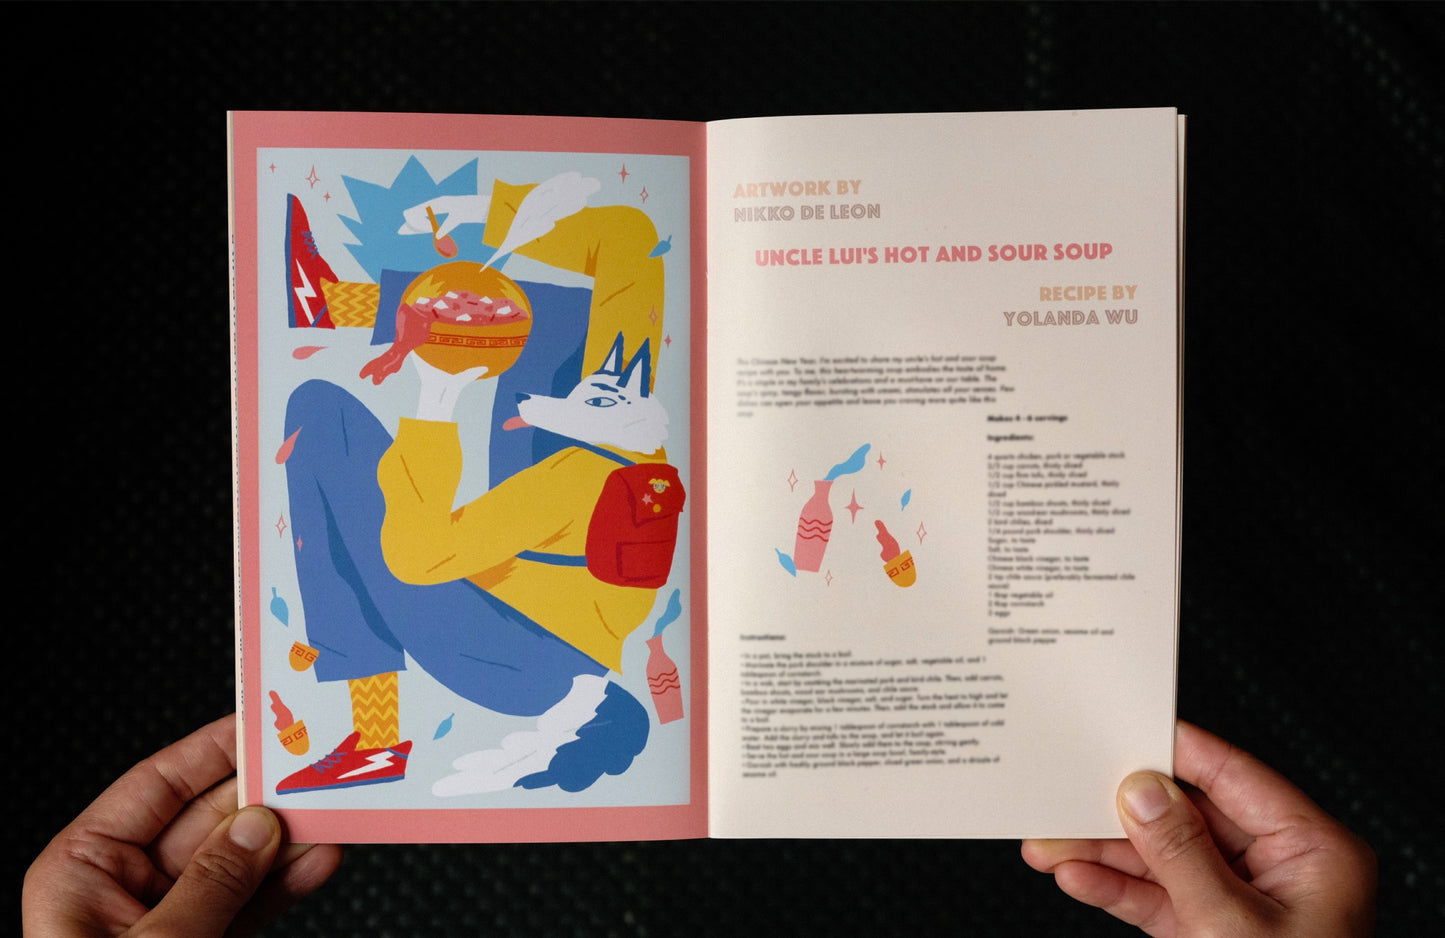 Inside pages featuring artwork by Nikko de Leon and Recipe by Yolanda Wu. Picture is of a fox with bowl of soup.